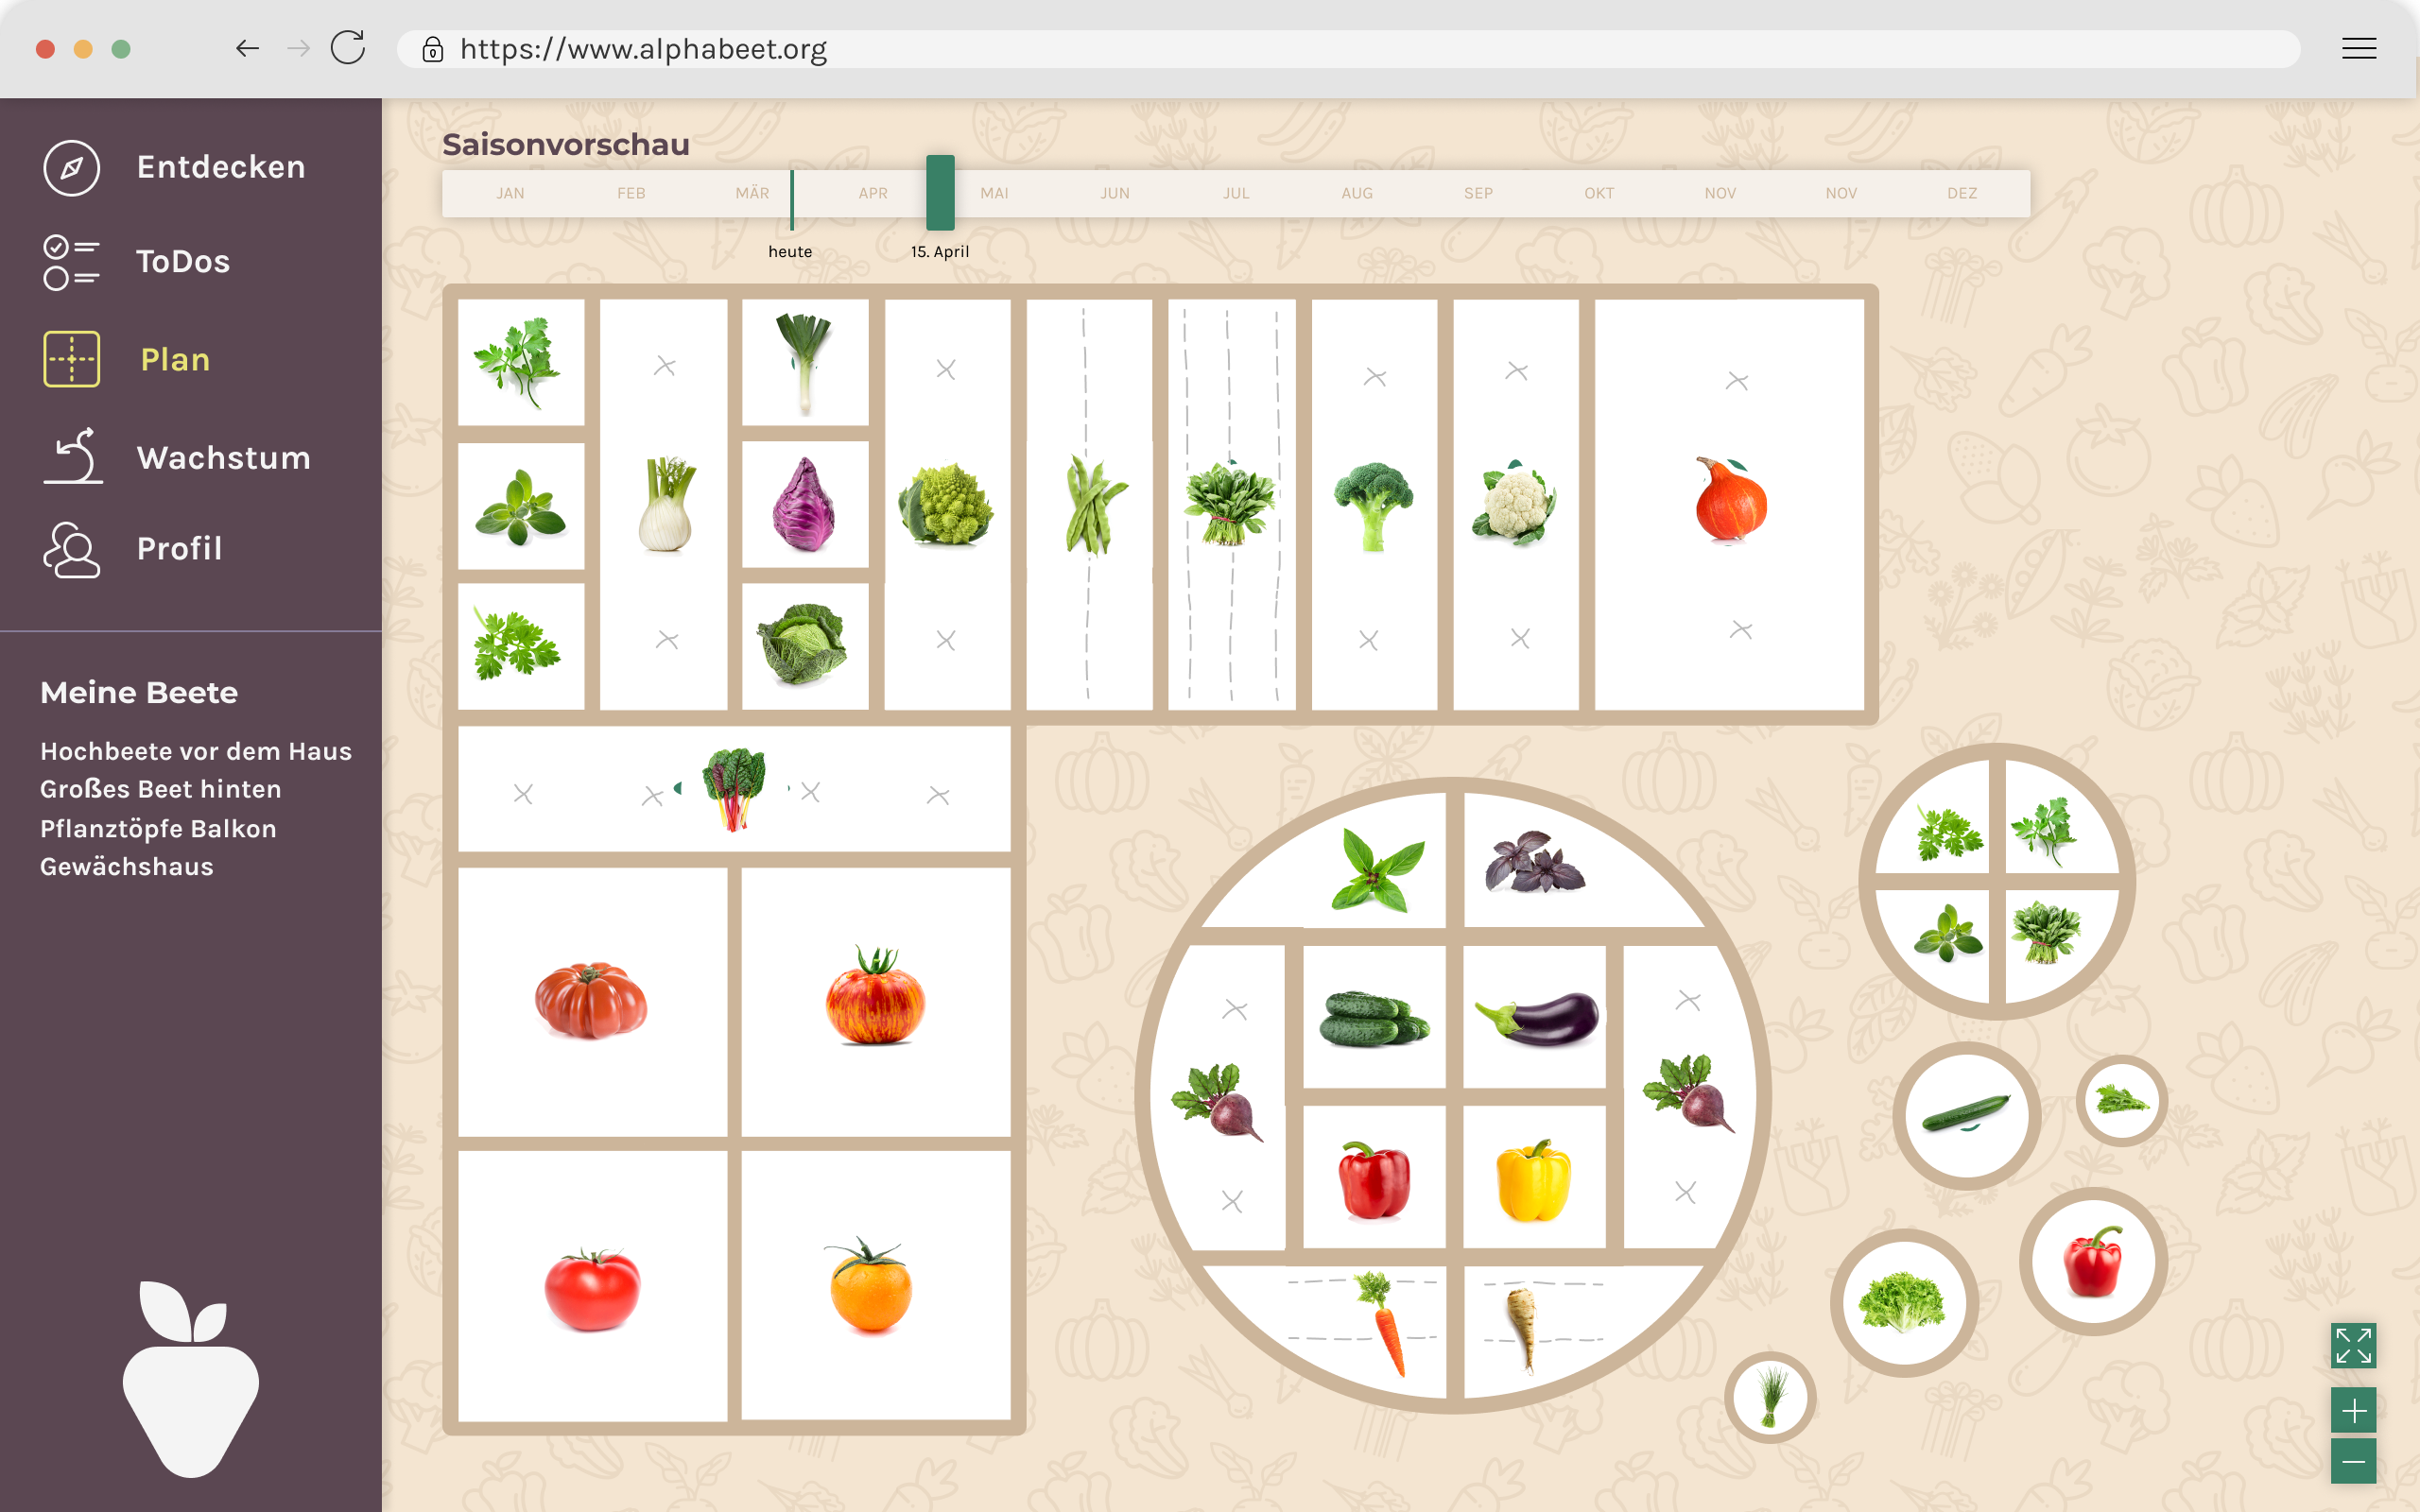 Internet browser with the alphabeet page open. On the left is a menu to choose from various options including “Discover”, “ToDos”, “Plan”, “Growth”, “Profile” and “My Beds”. "Plan" is open, which shows the seasonal change in the crops grown in the selected bed.